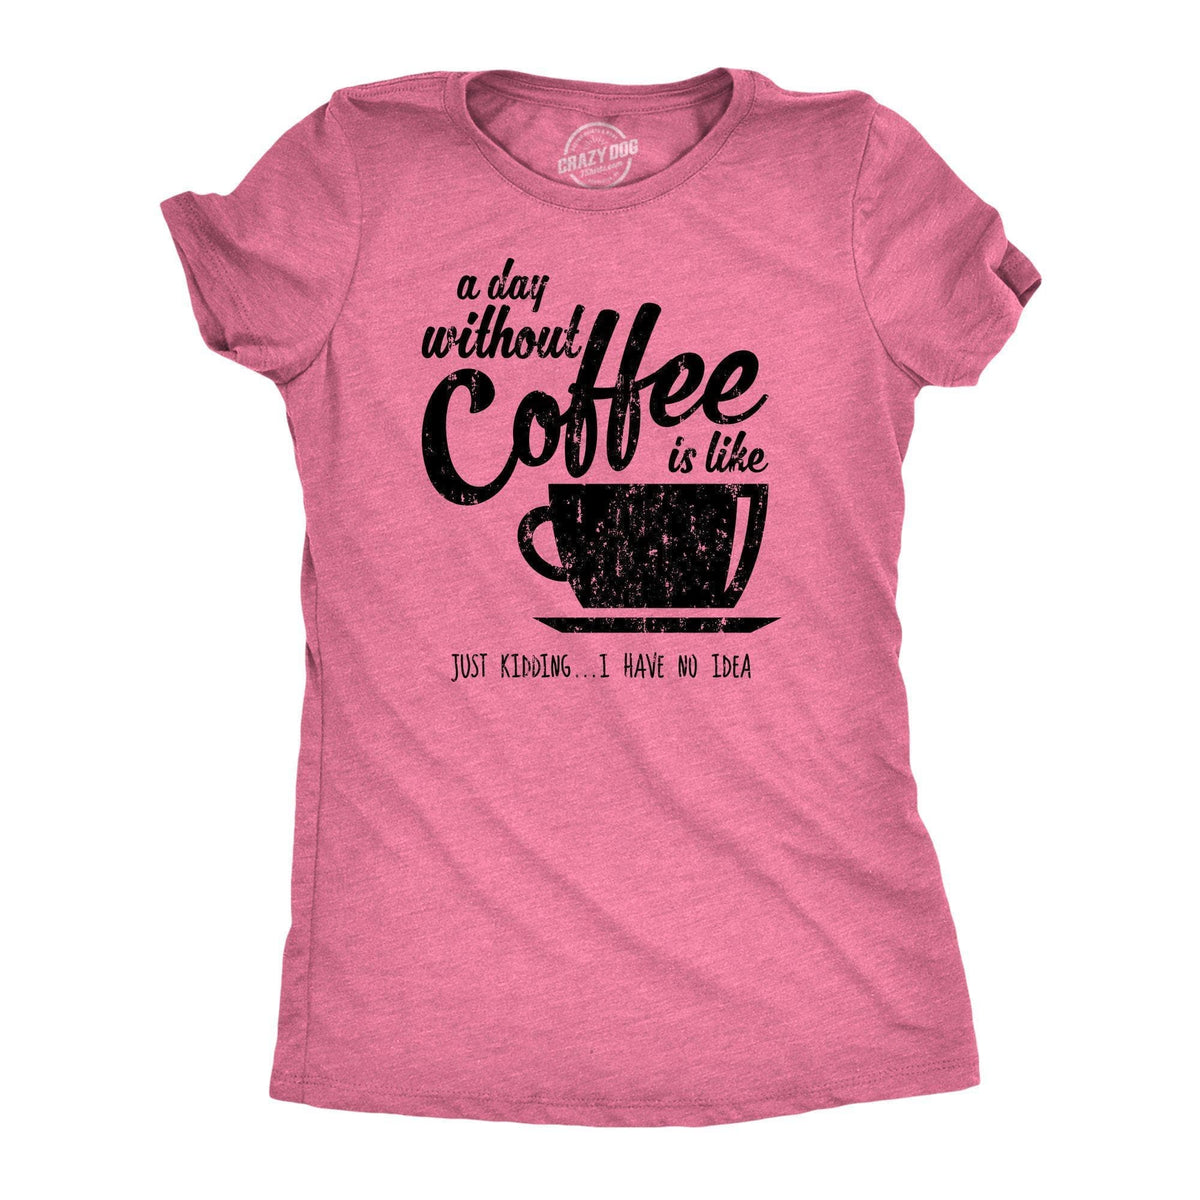 A Day Without Coffee Is Like Just Kidding I Have No Idea Women&#39;s Tshirt - Crazy Dog T-Shirts